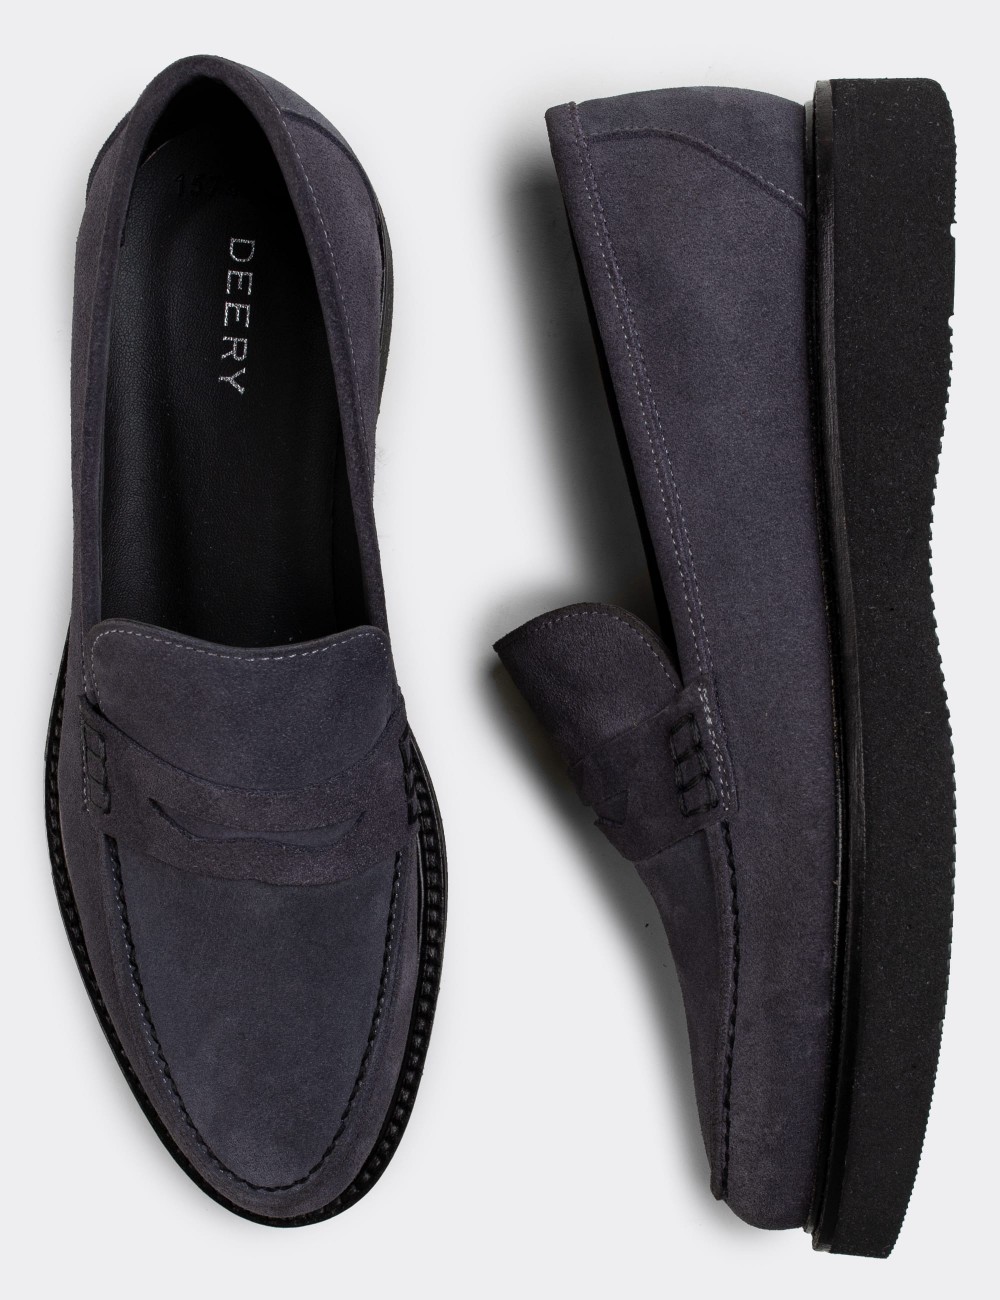 Gray Suede Leather Loafers - 01574ZGRIE01